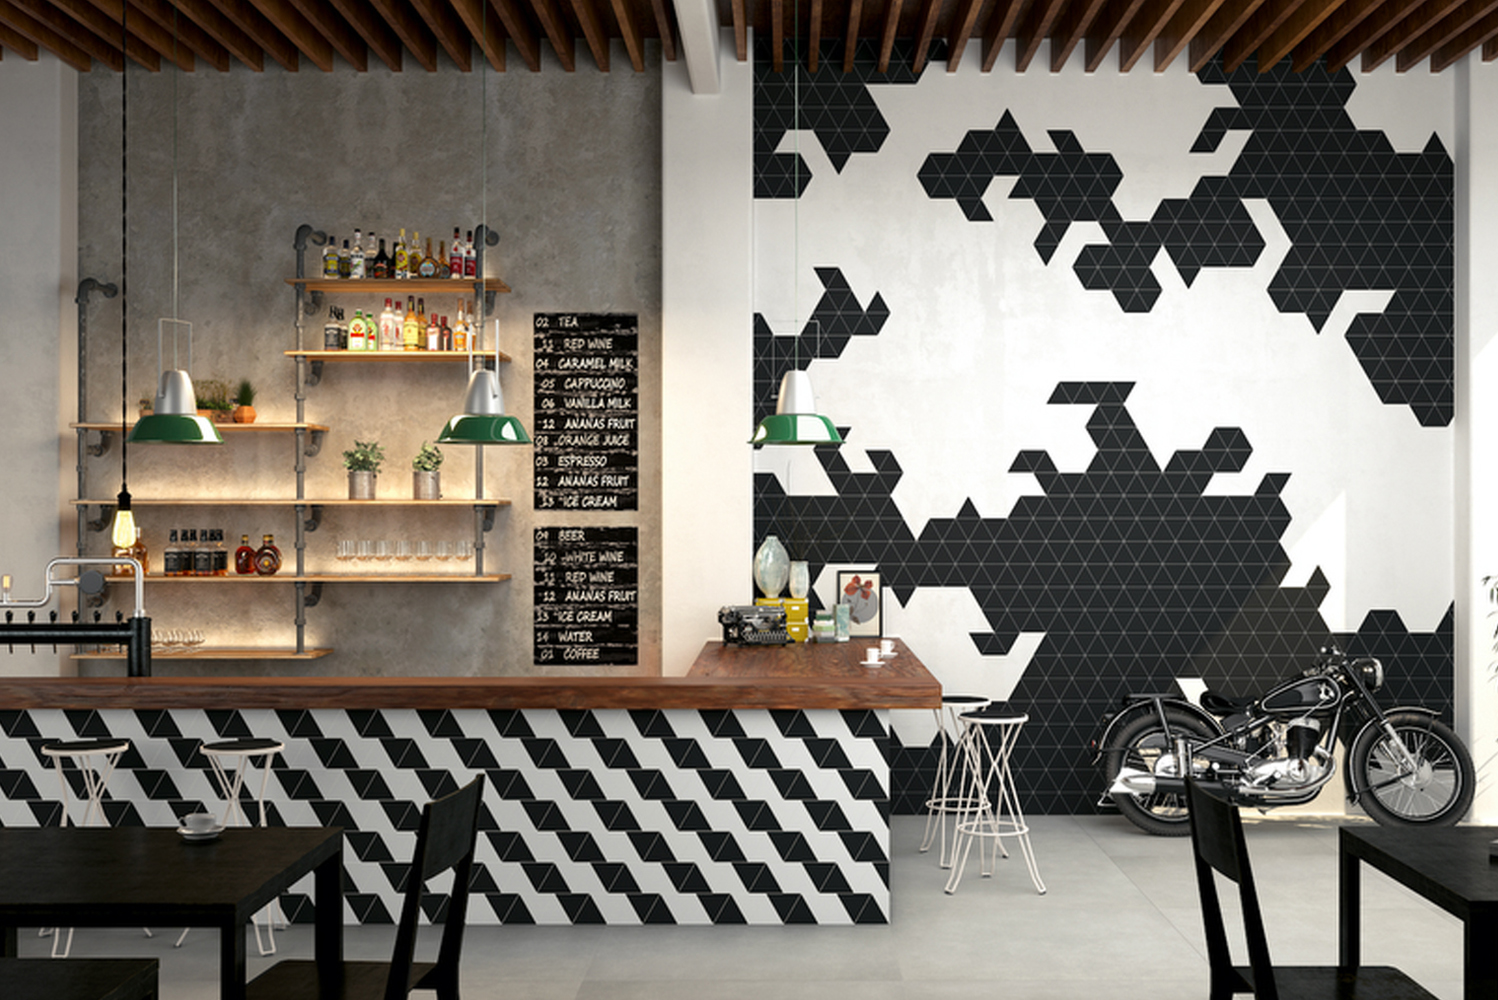 Introducing Attire a ceramic triangular wall tile that is the latest collection from Nemo Tile  Stone